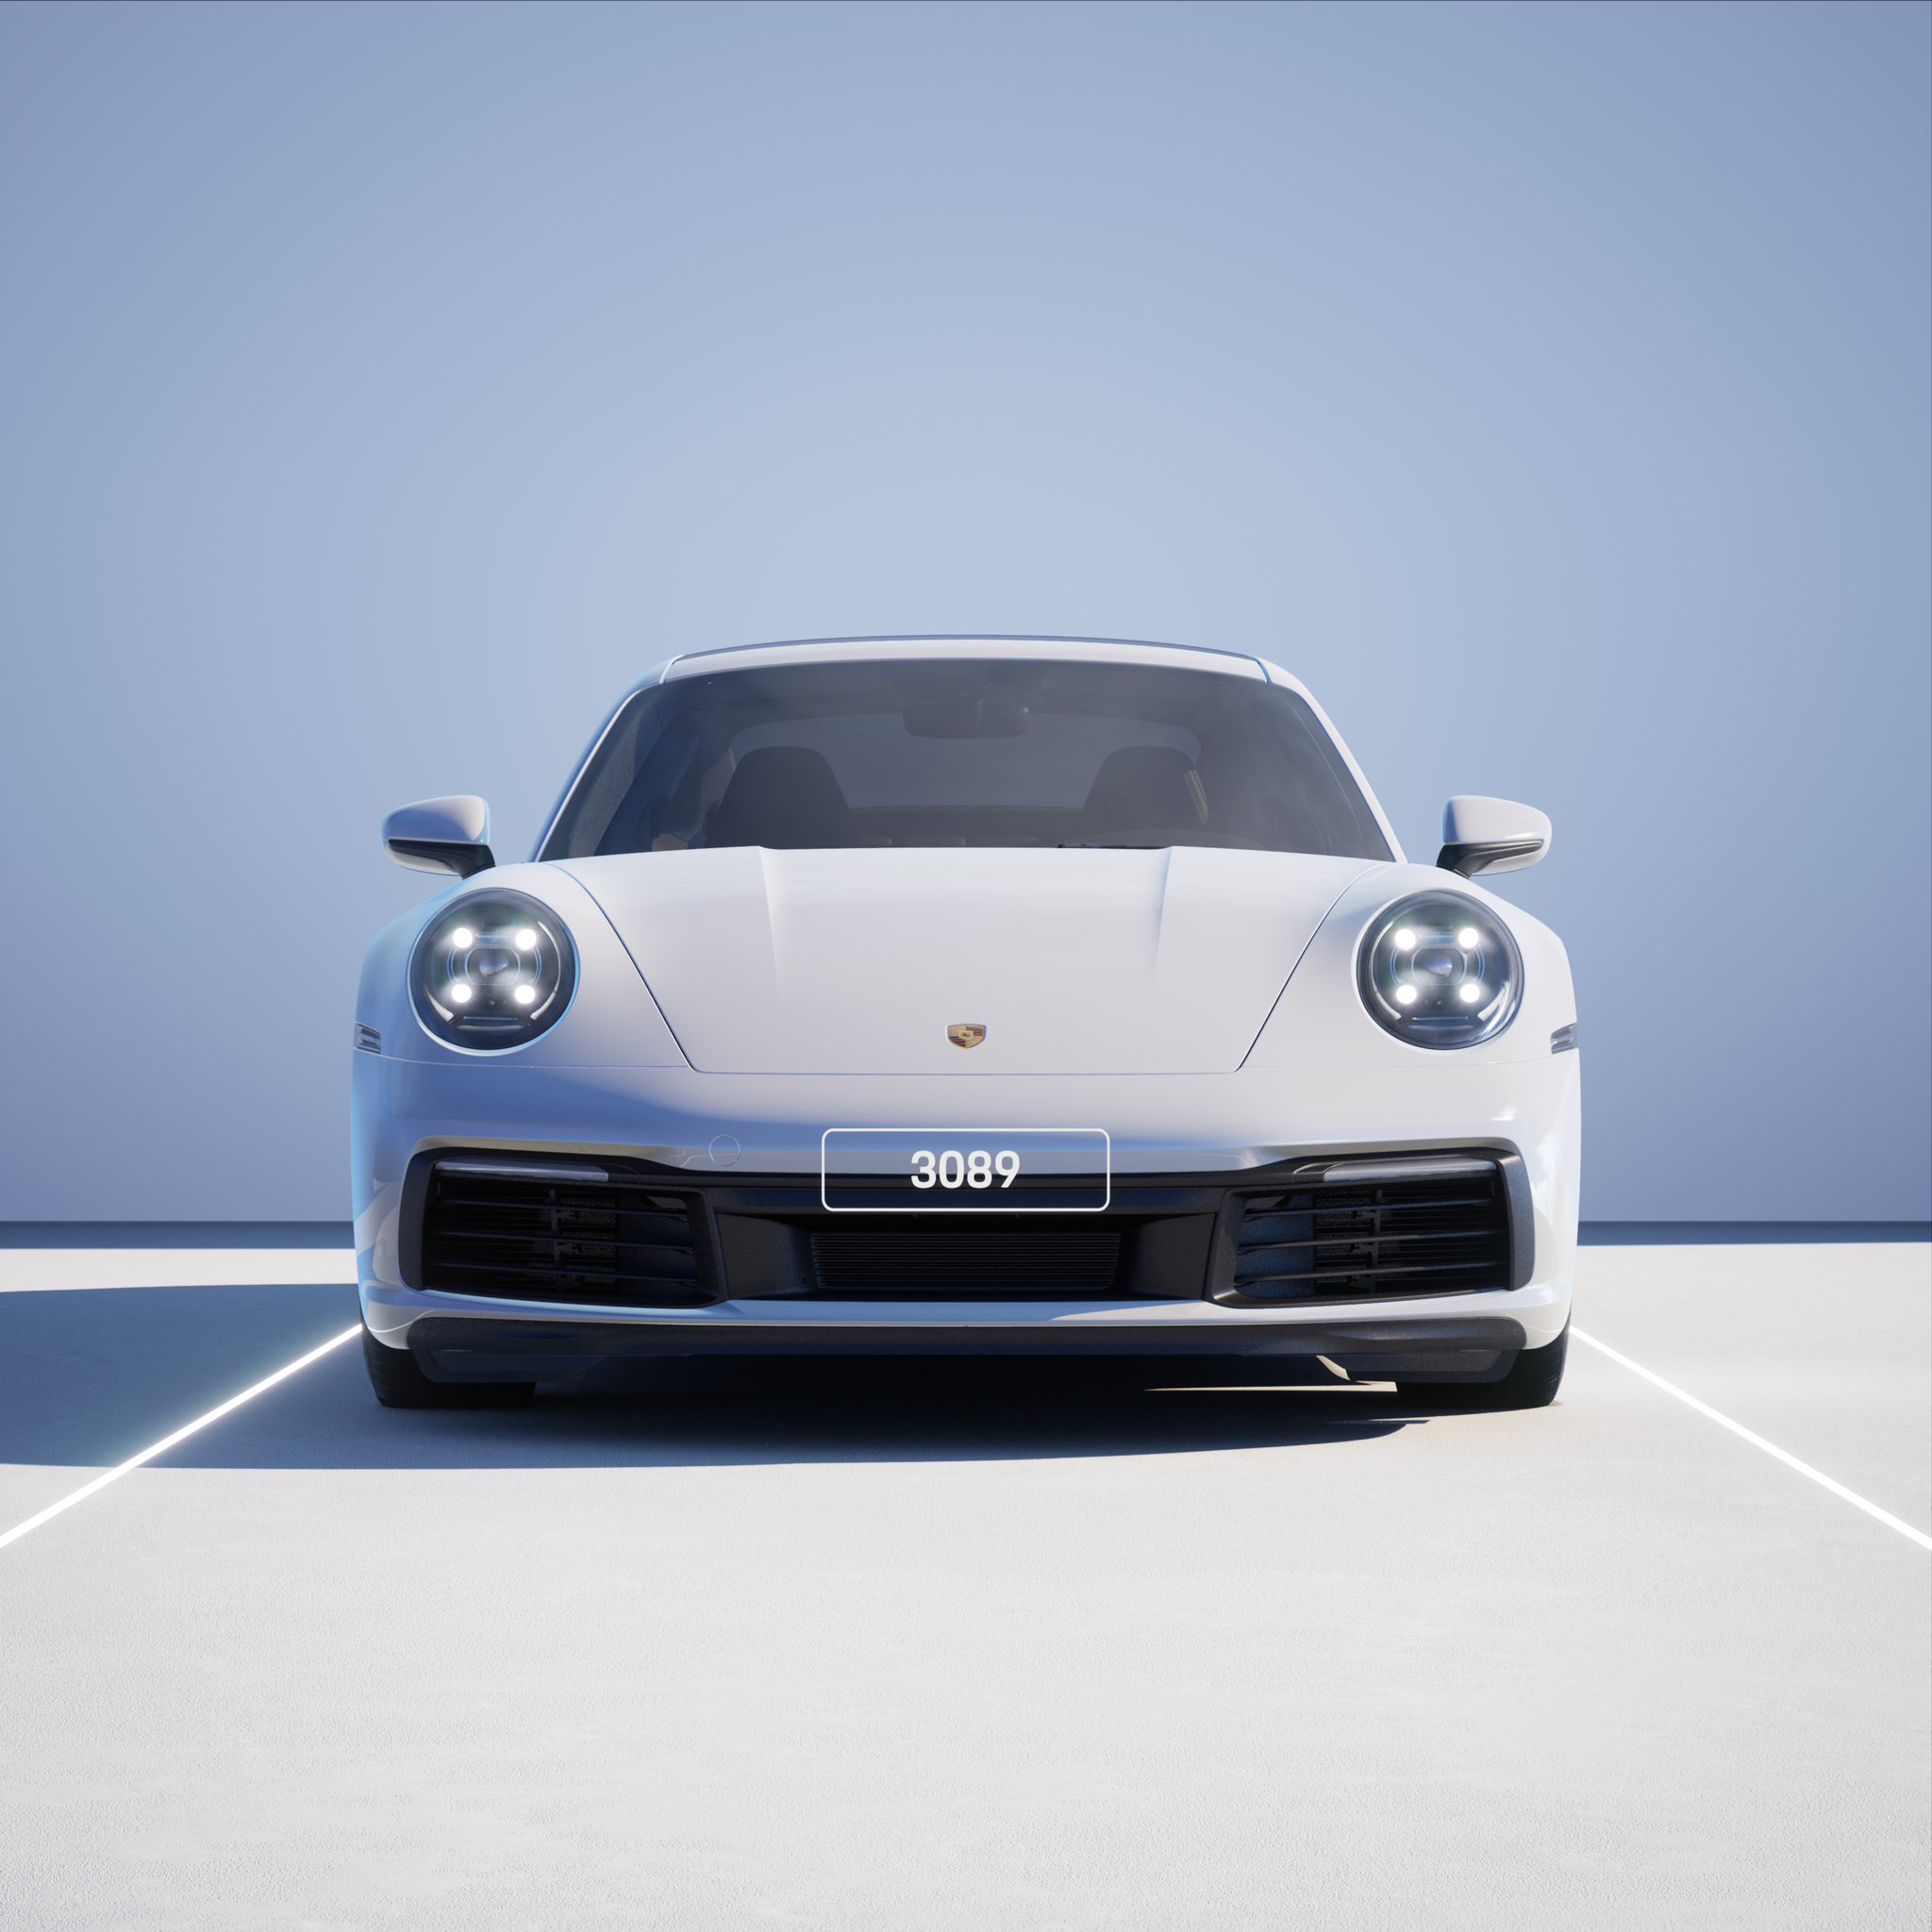 The PORSCHΞ 911 3089 image in phase